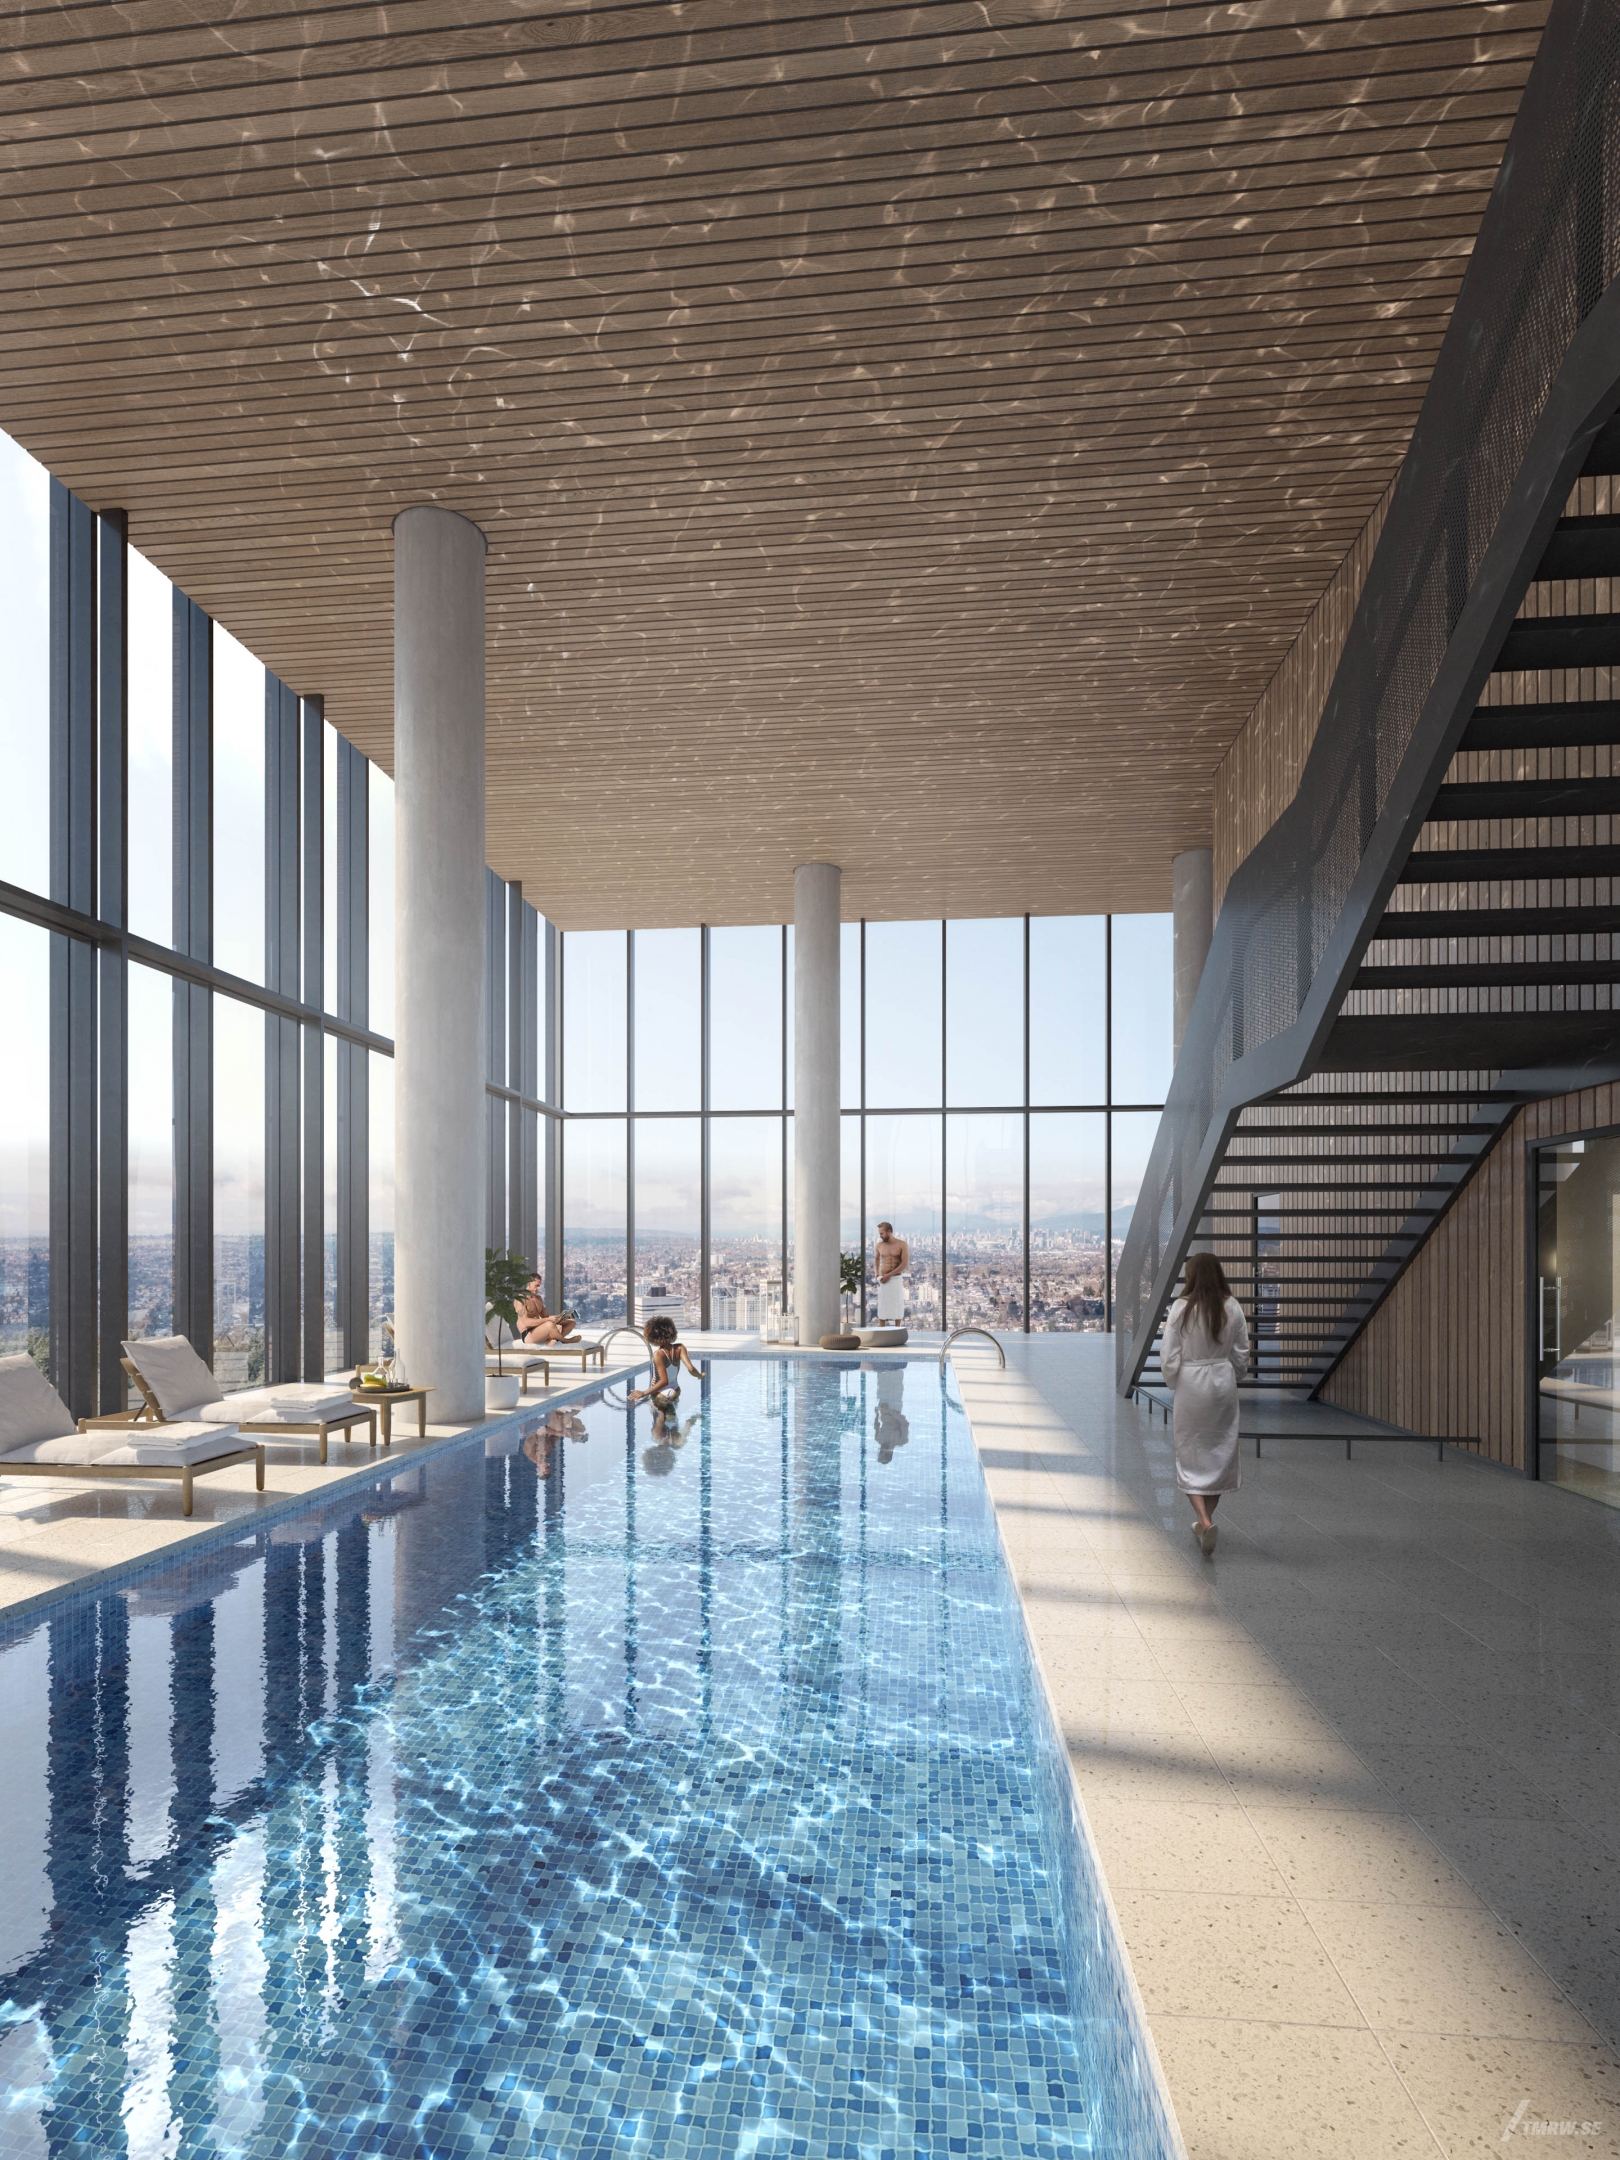 Architectural visualization of Central Park House for Gensler, residential skyscraper, pool with a city view